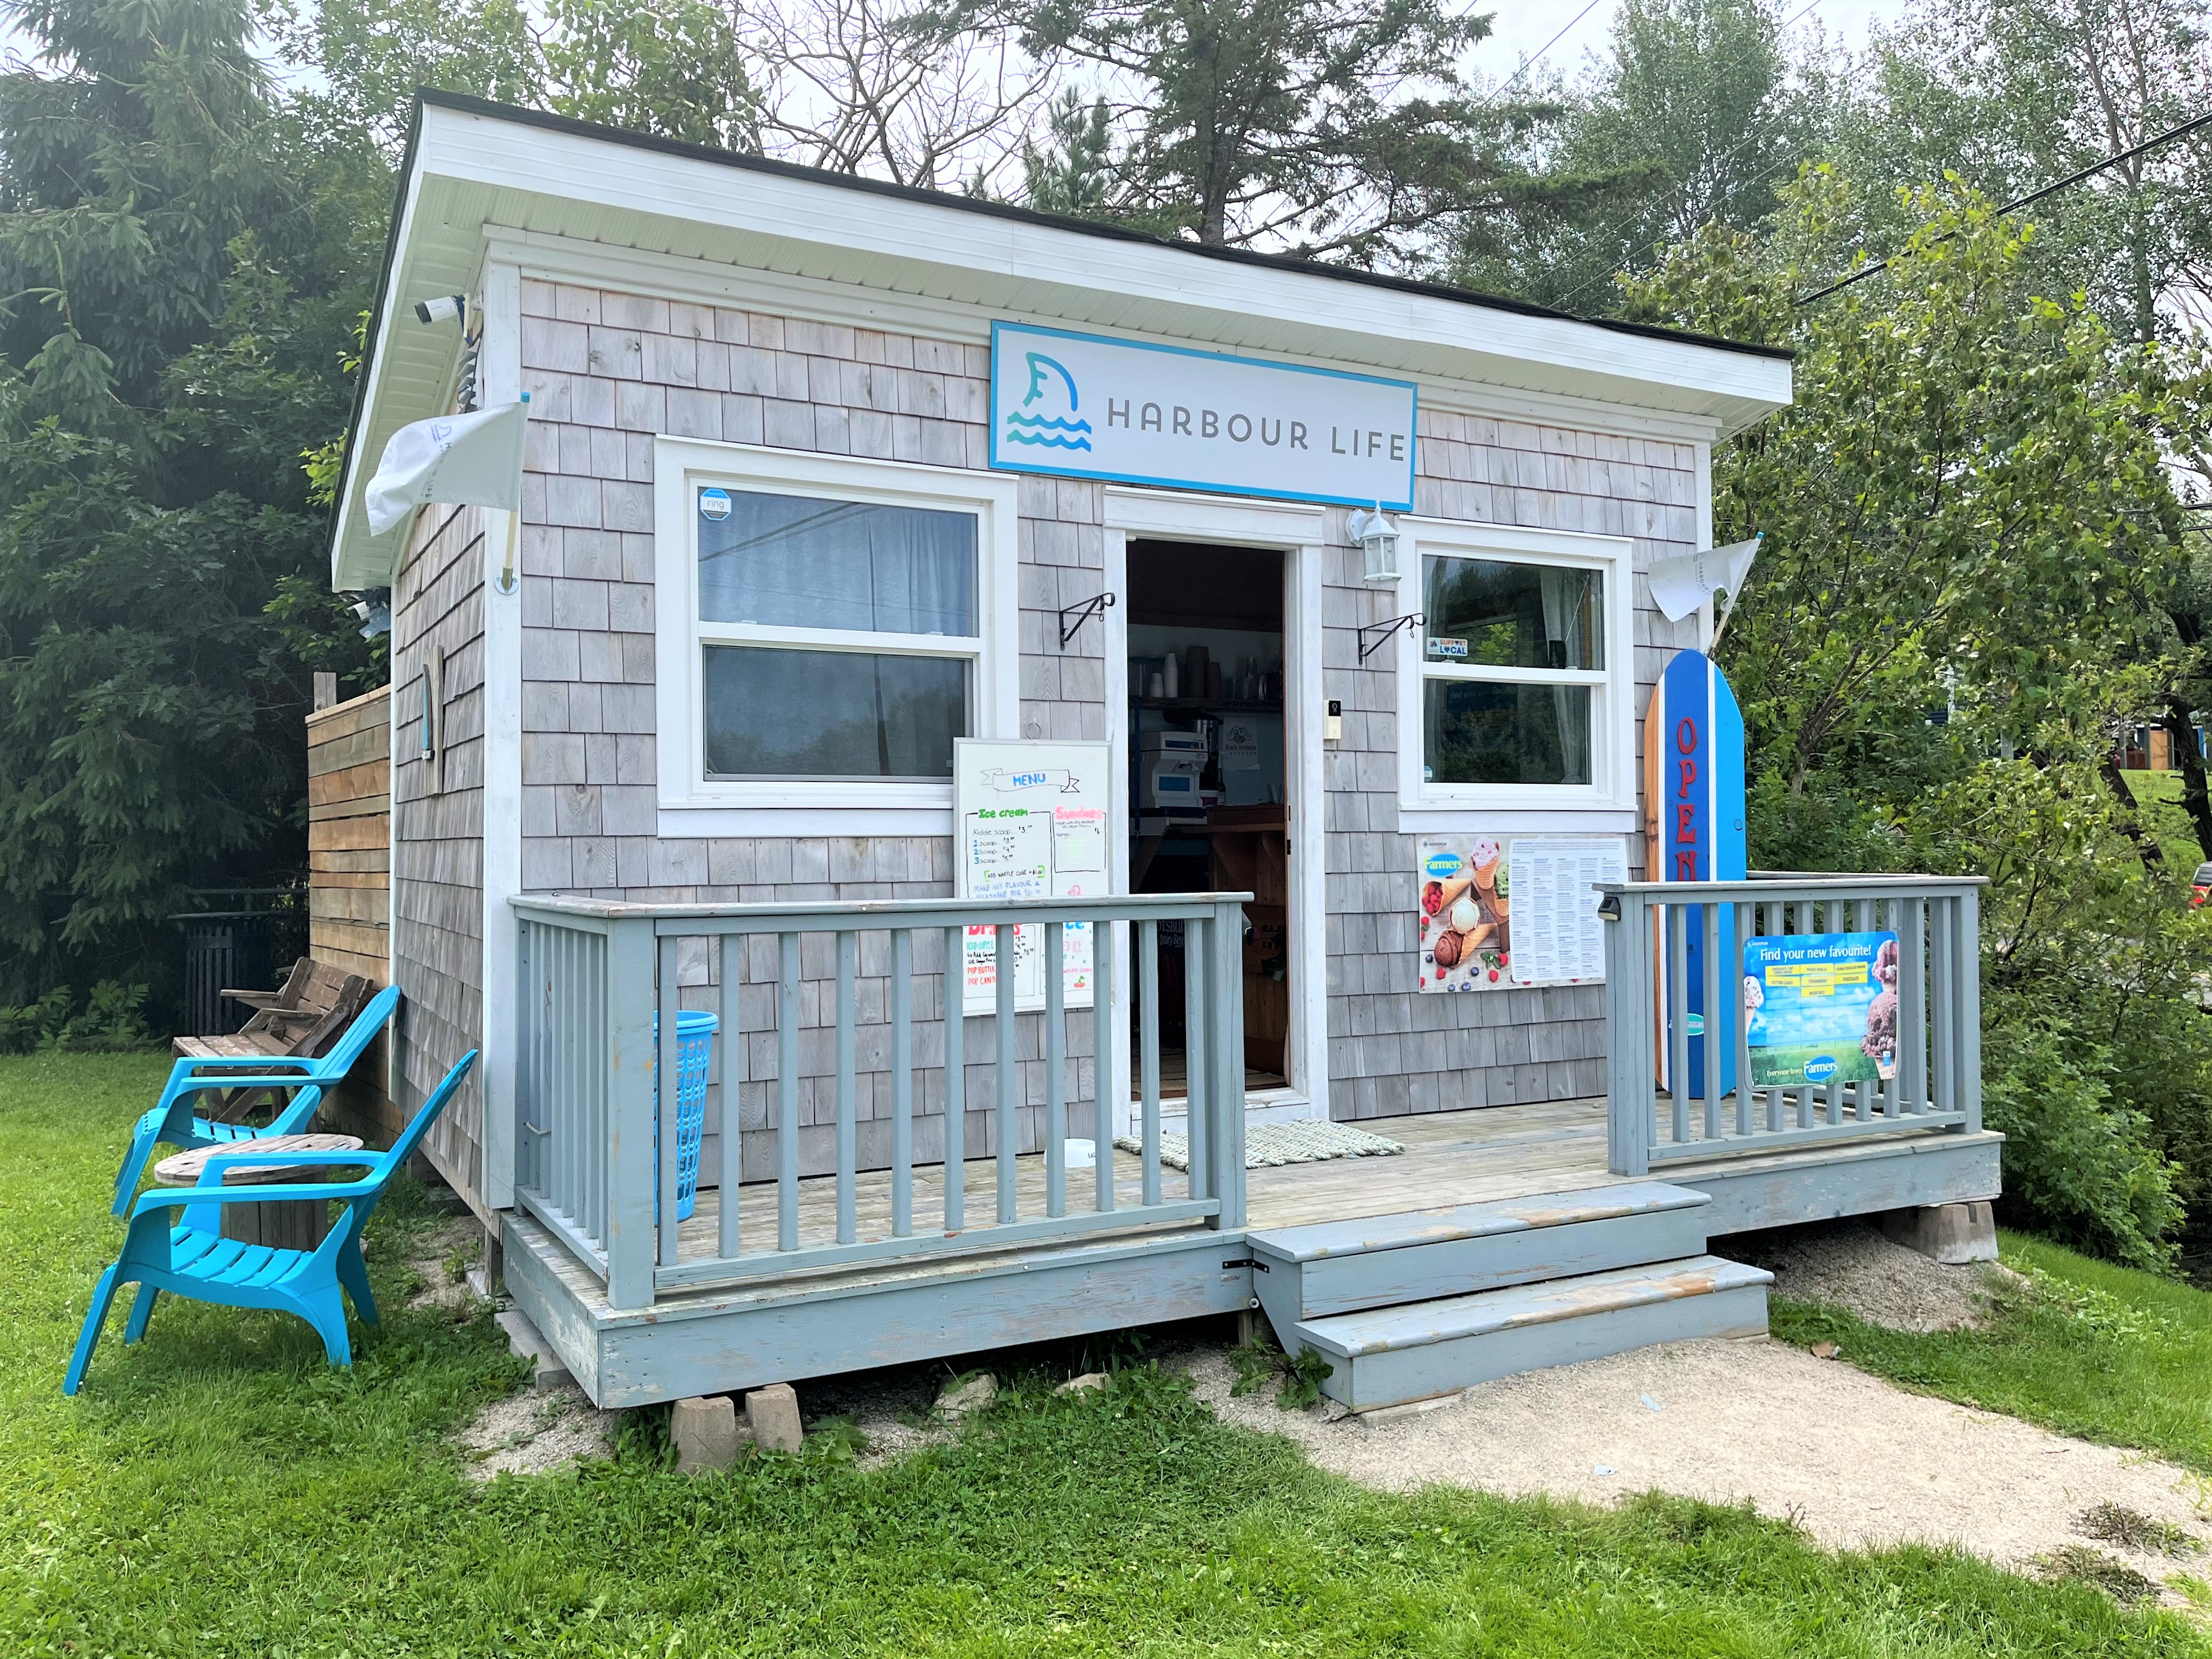 Small grey gabled building with a sign reading "Harbour Life" above the open door. A menu is outside showing the flavours of ice cream and two blue deck chairs are on the grass to the left of the building.